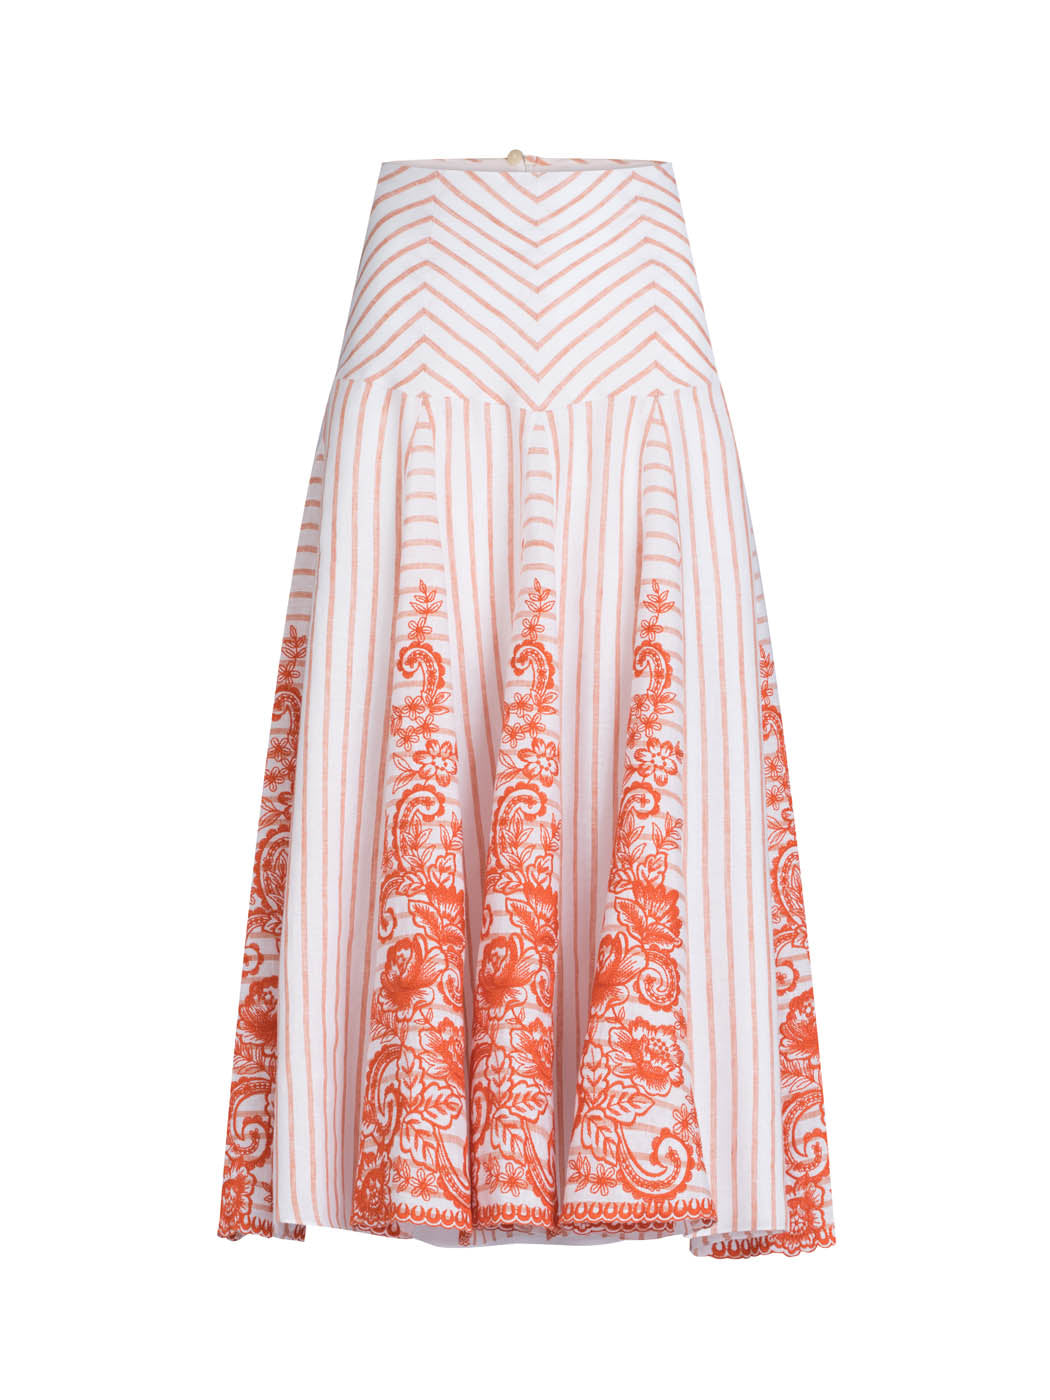 High waisted Fairus Skirt Coral Paisleys Stripes with intricate orange embroidery, isolated on a white background.